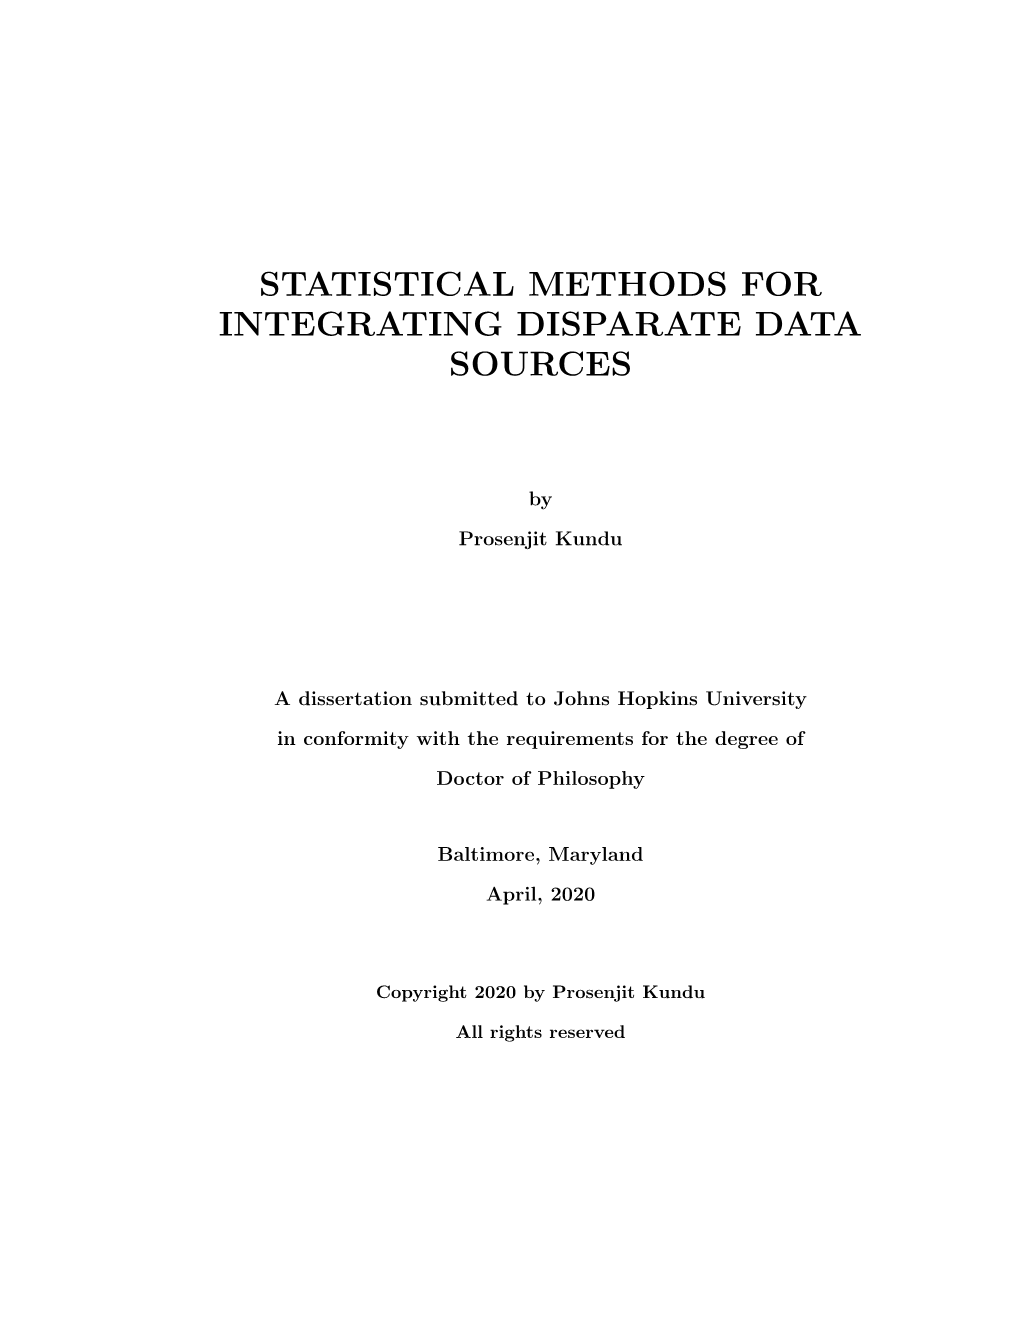 Statistical Methods for Integrating Disparate Data Sources